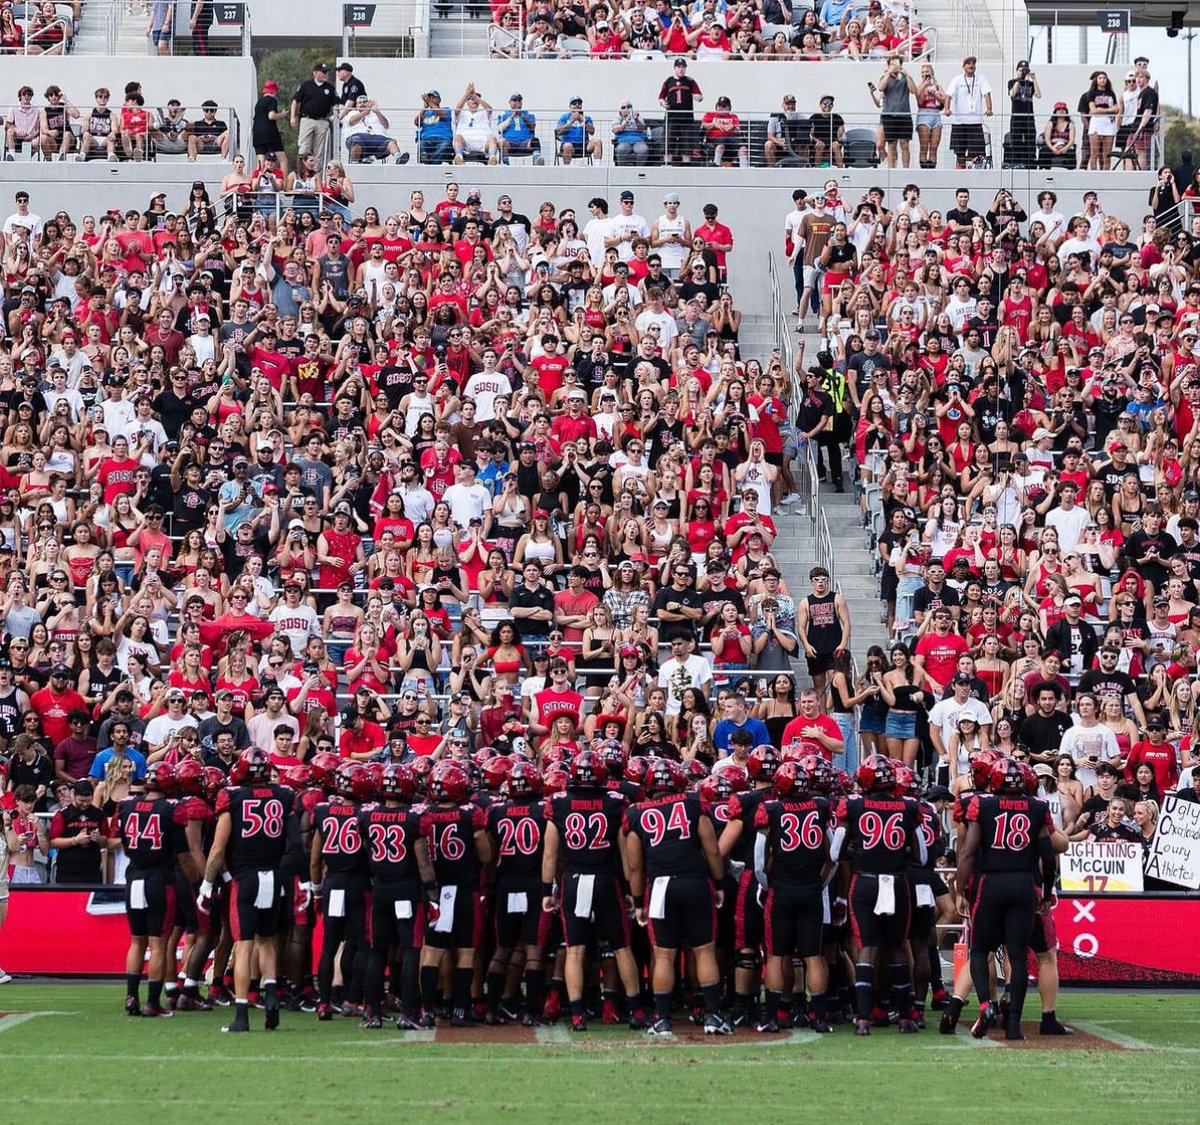 After an amazing visit and conversation with @TheHC_CoachLew, I’m extremely blessed to say that I have received an offer from San Diego State University! @cjmcgorisk @GregBiggins @marvinpollard_6 @LMBPINKY @BrandonHuffman @ChadSimmons_ @Serra__Football